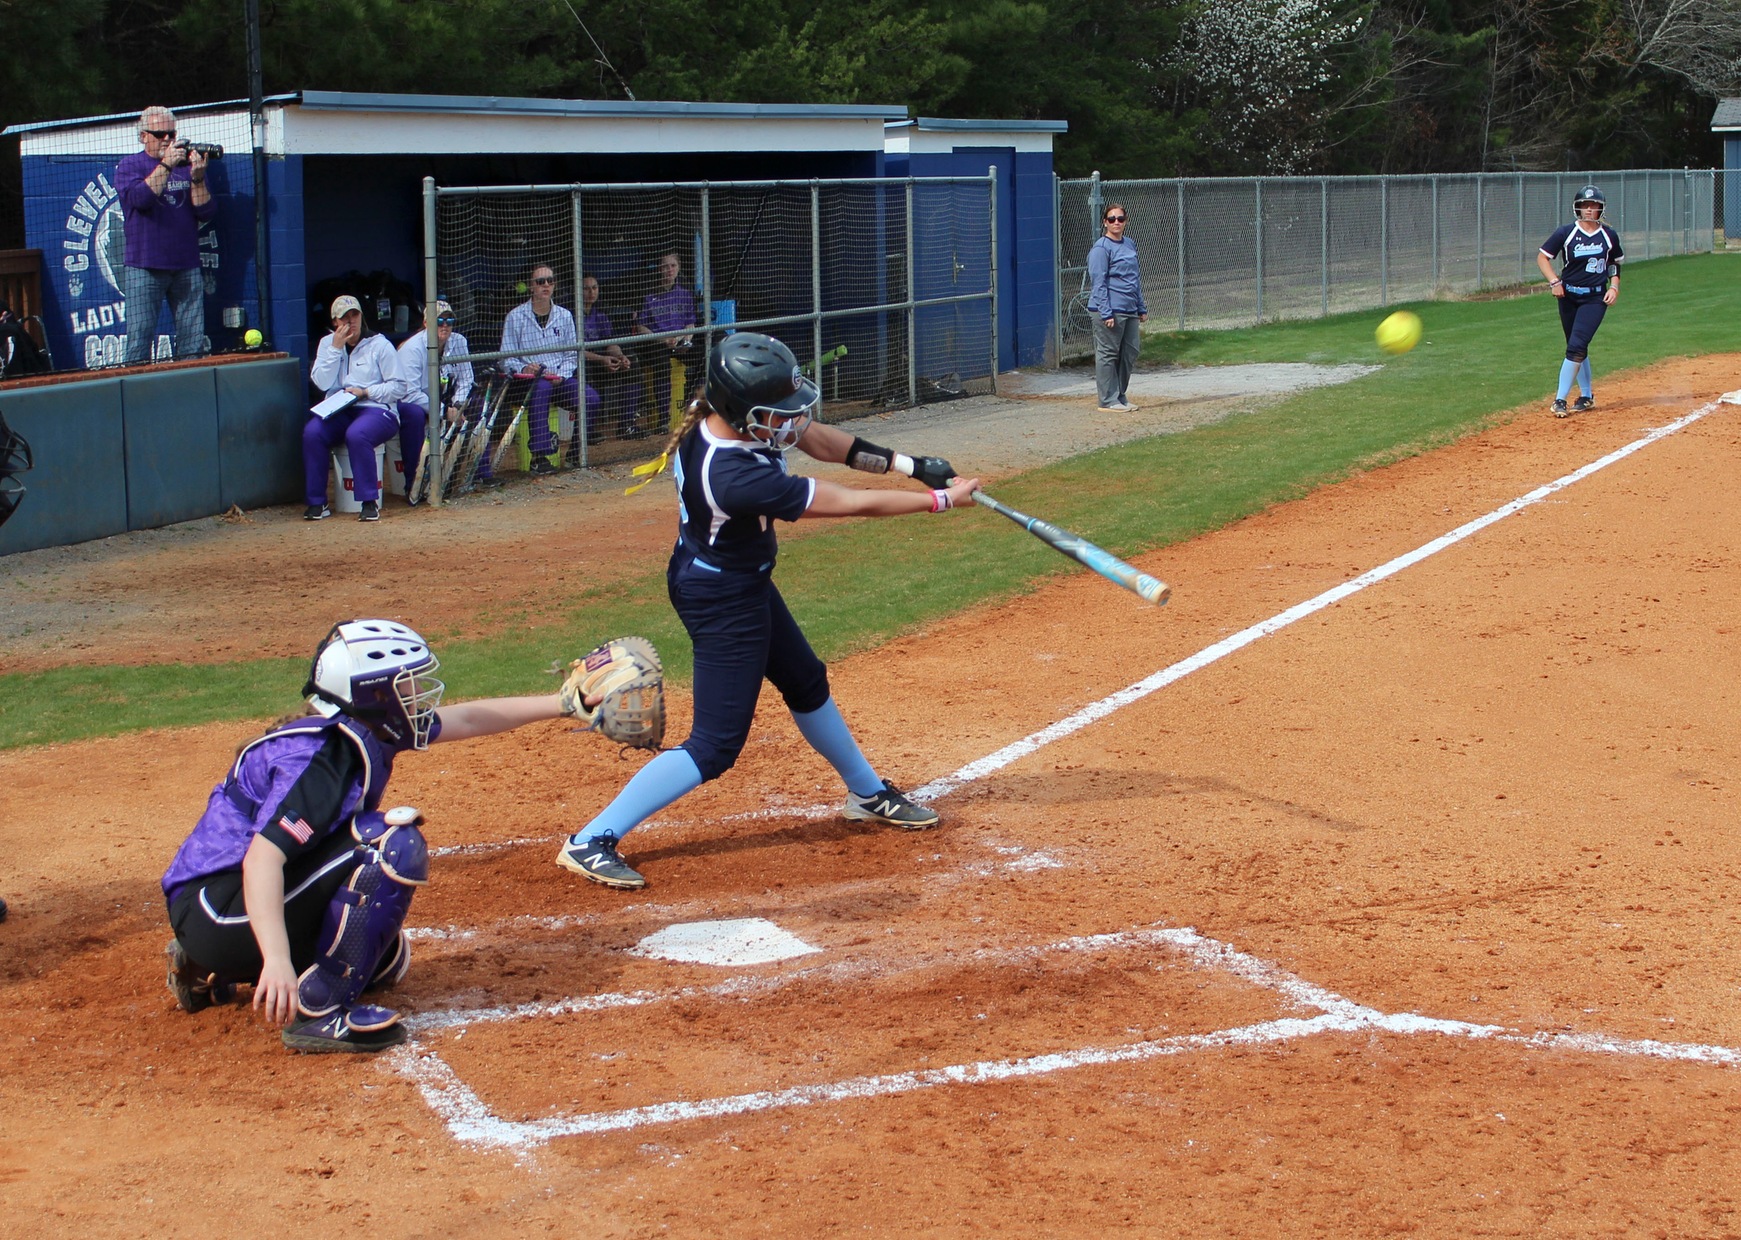 PREVIEW: Lady Cougars To Play Weekend Series with Jackson State